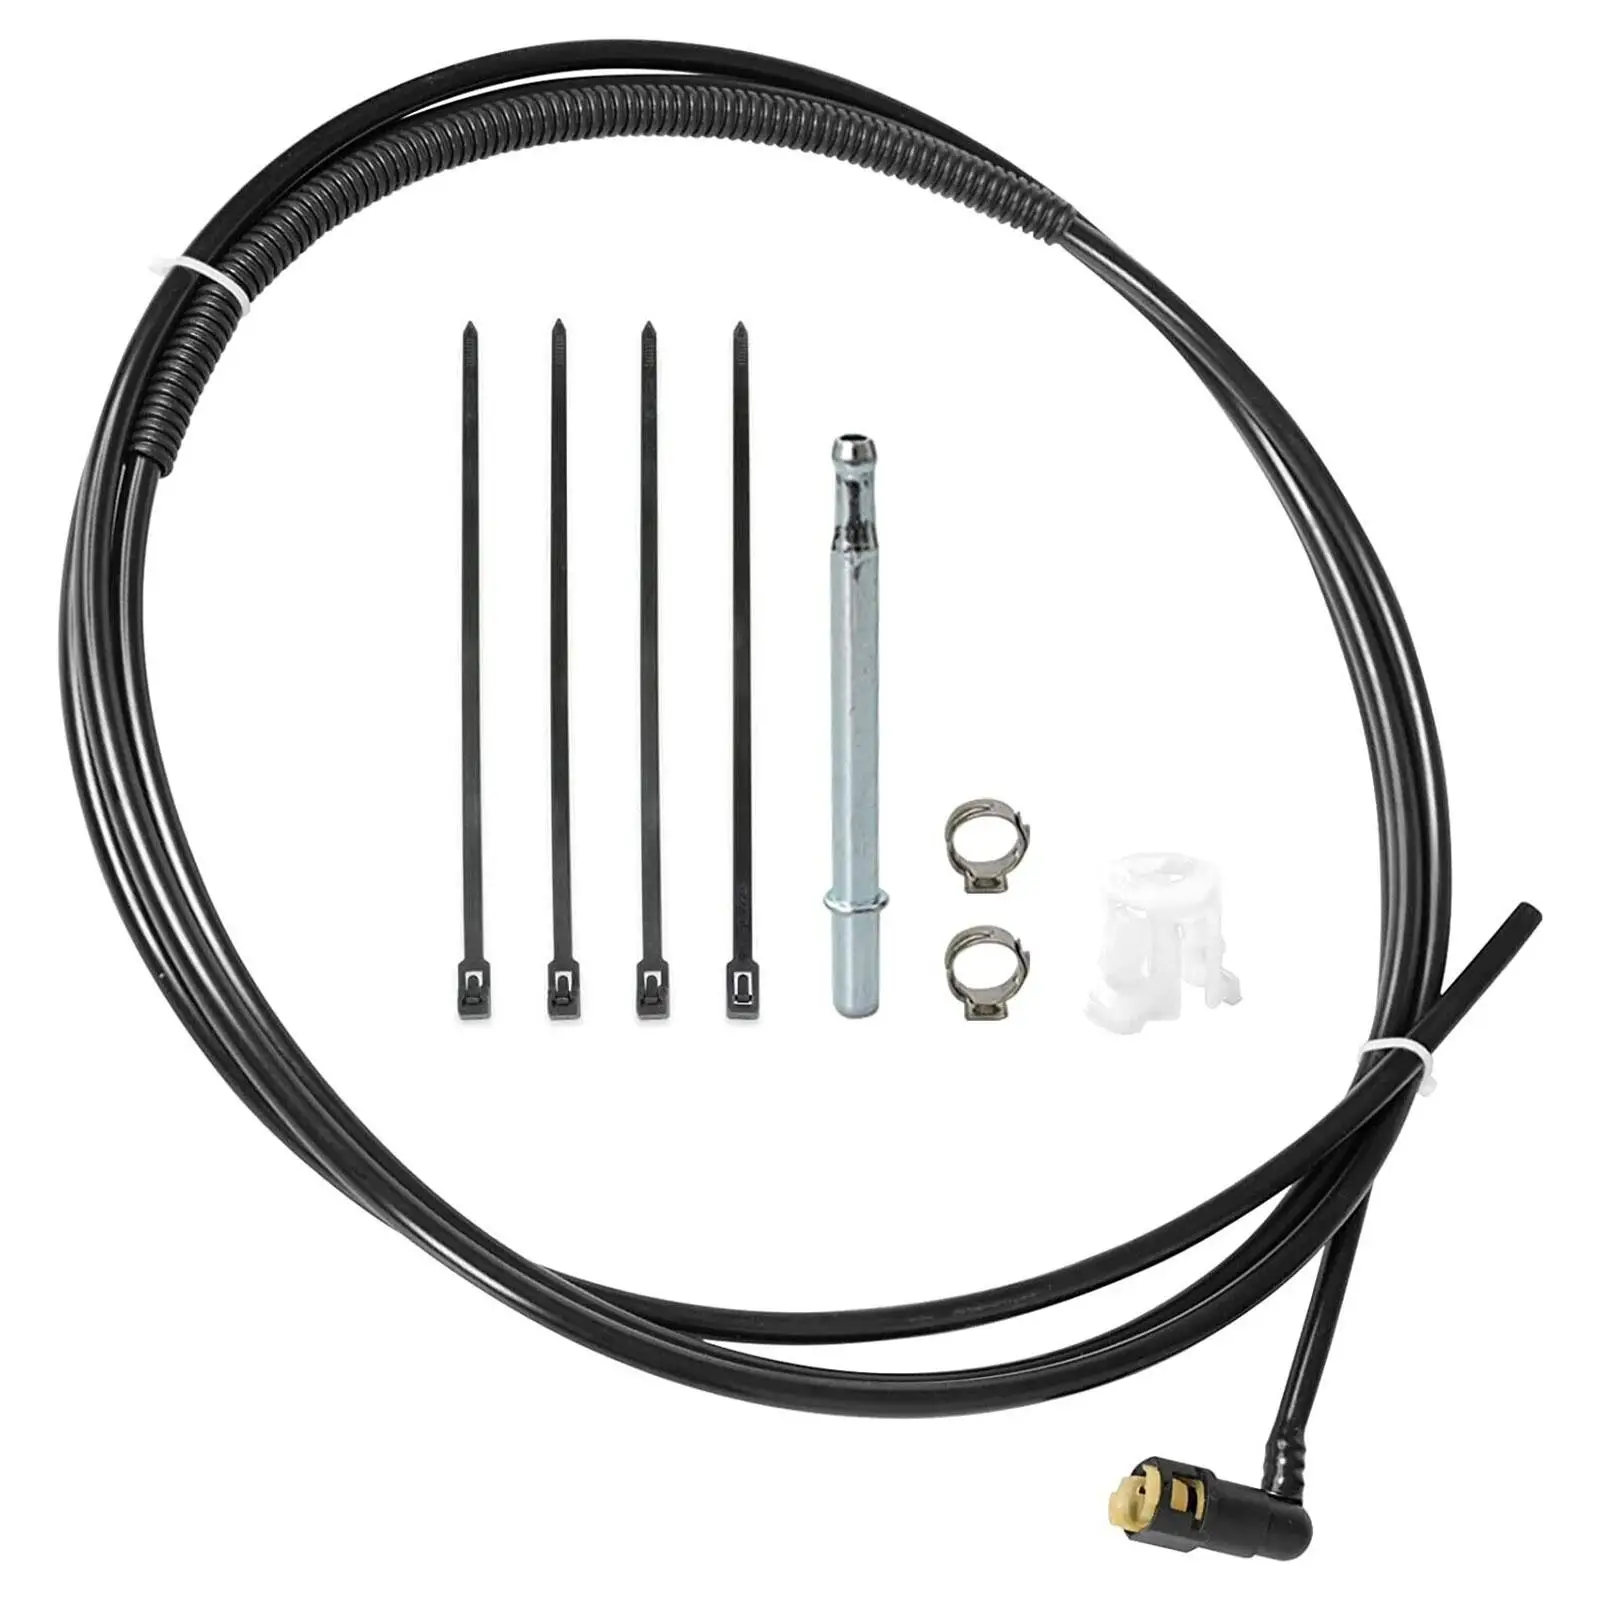 Gas Fuel Line Fl-Fg0212 Spare Parts Replaces High performance Car Accessories for Dodge RAM Pick up 1500 2500 3500